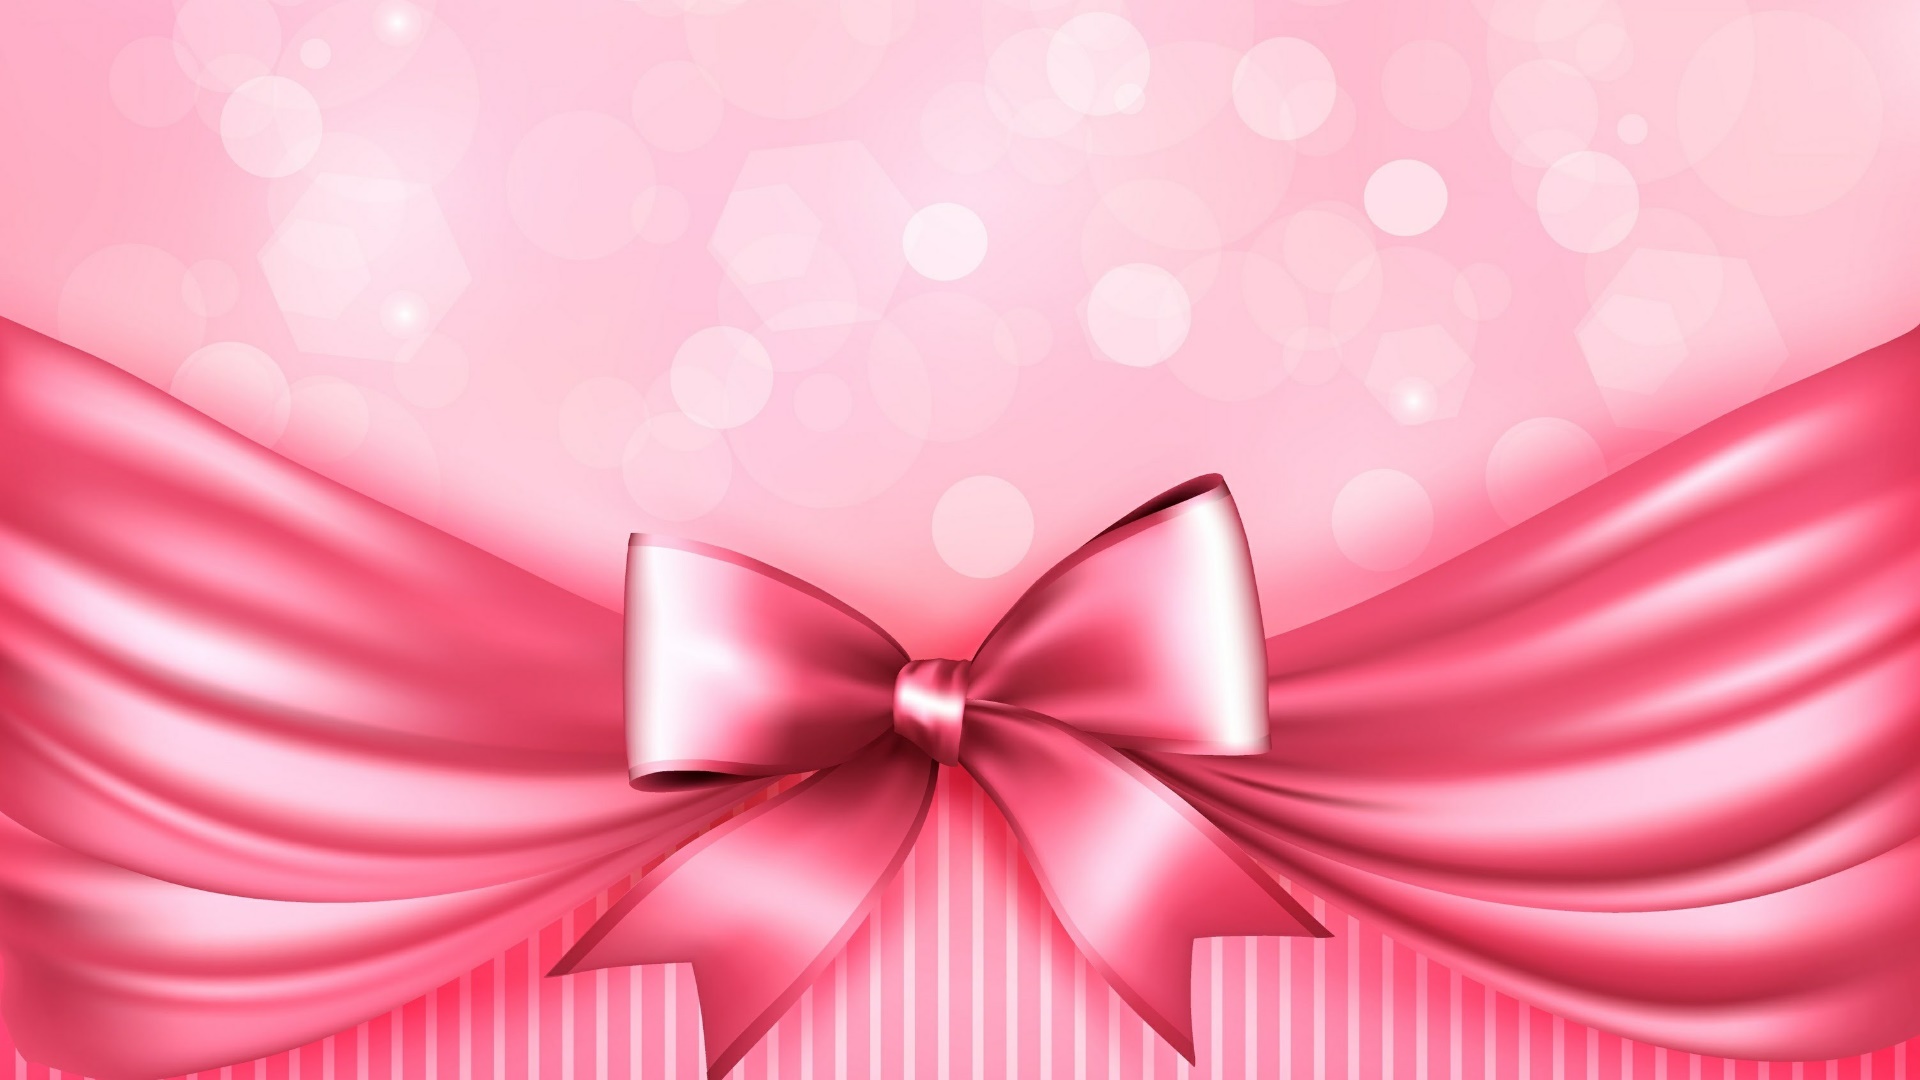 Artistic Pink HD Wallpaper | Background Image